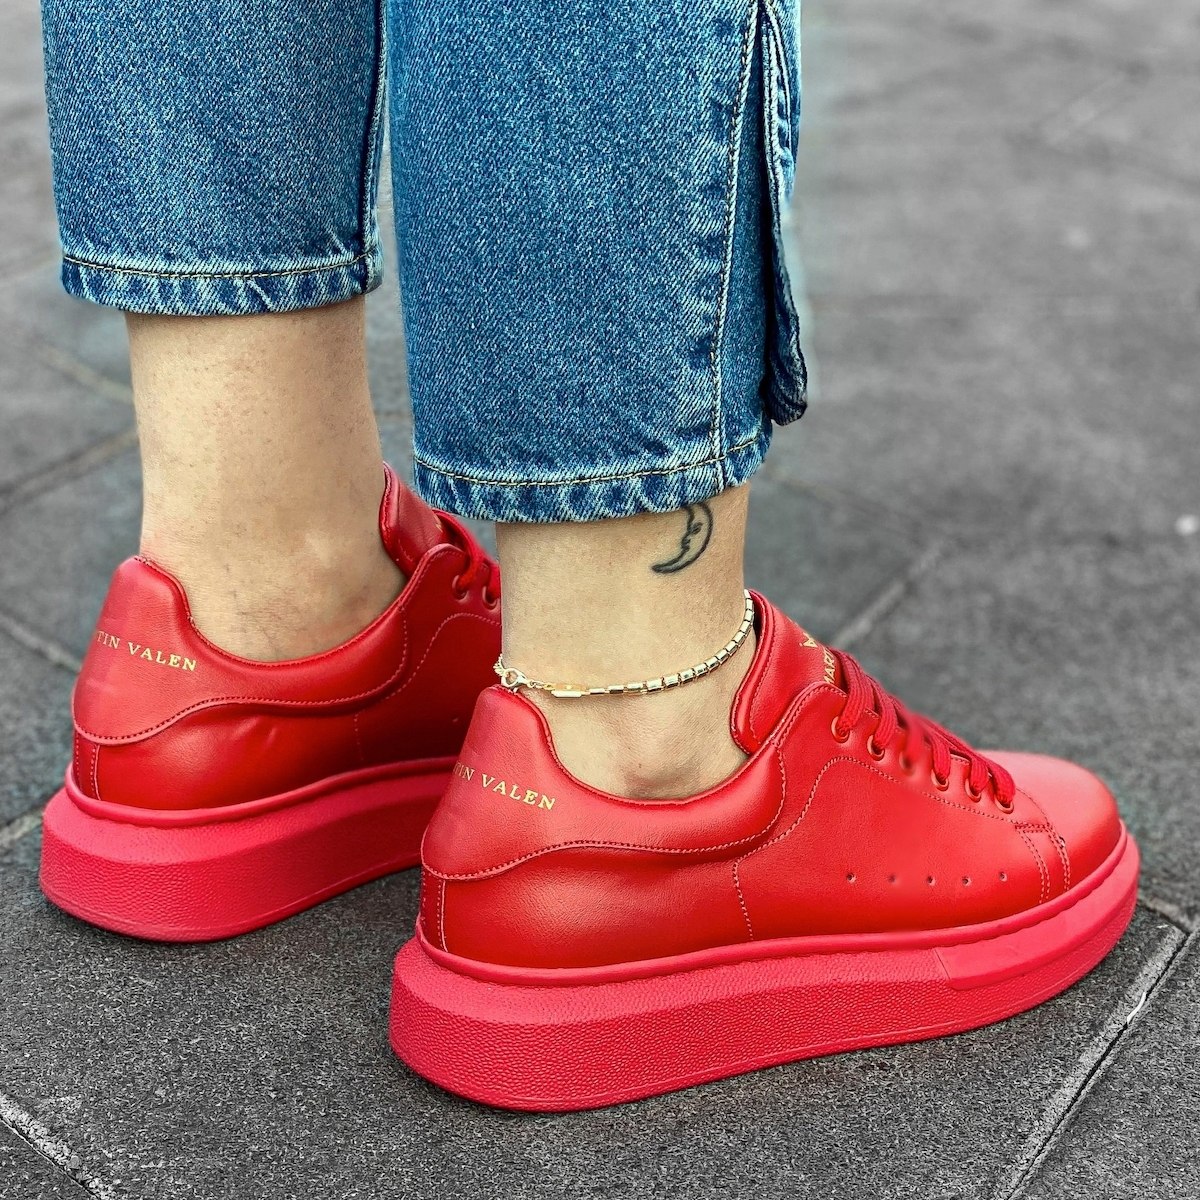 Woman's Hype Sole Sneakers In Full Red | Martin Valen